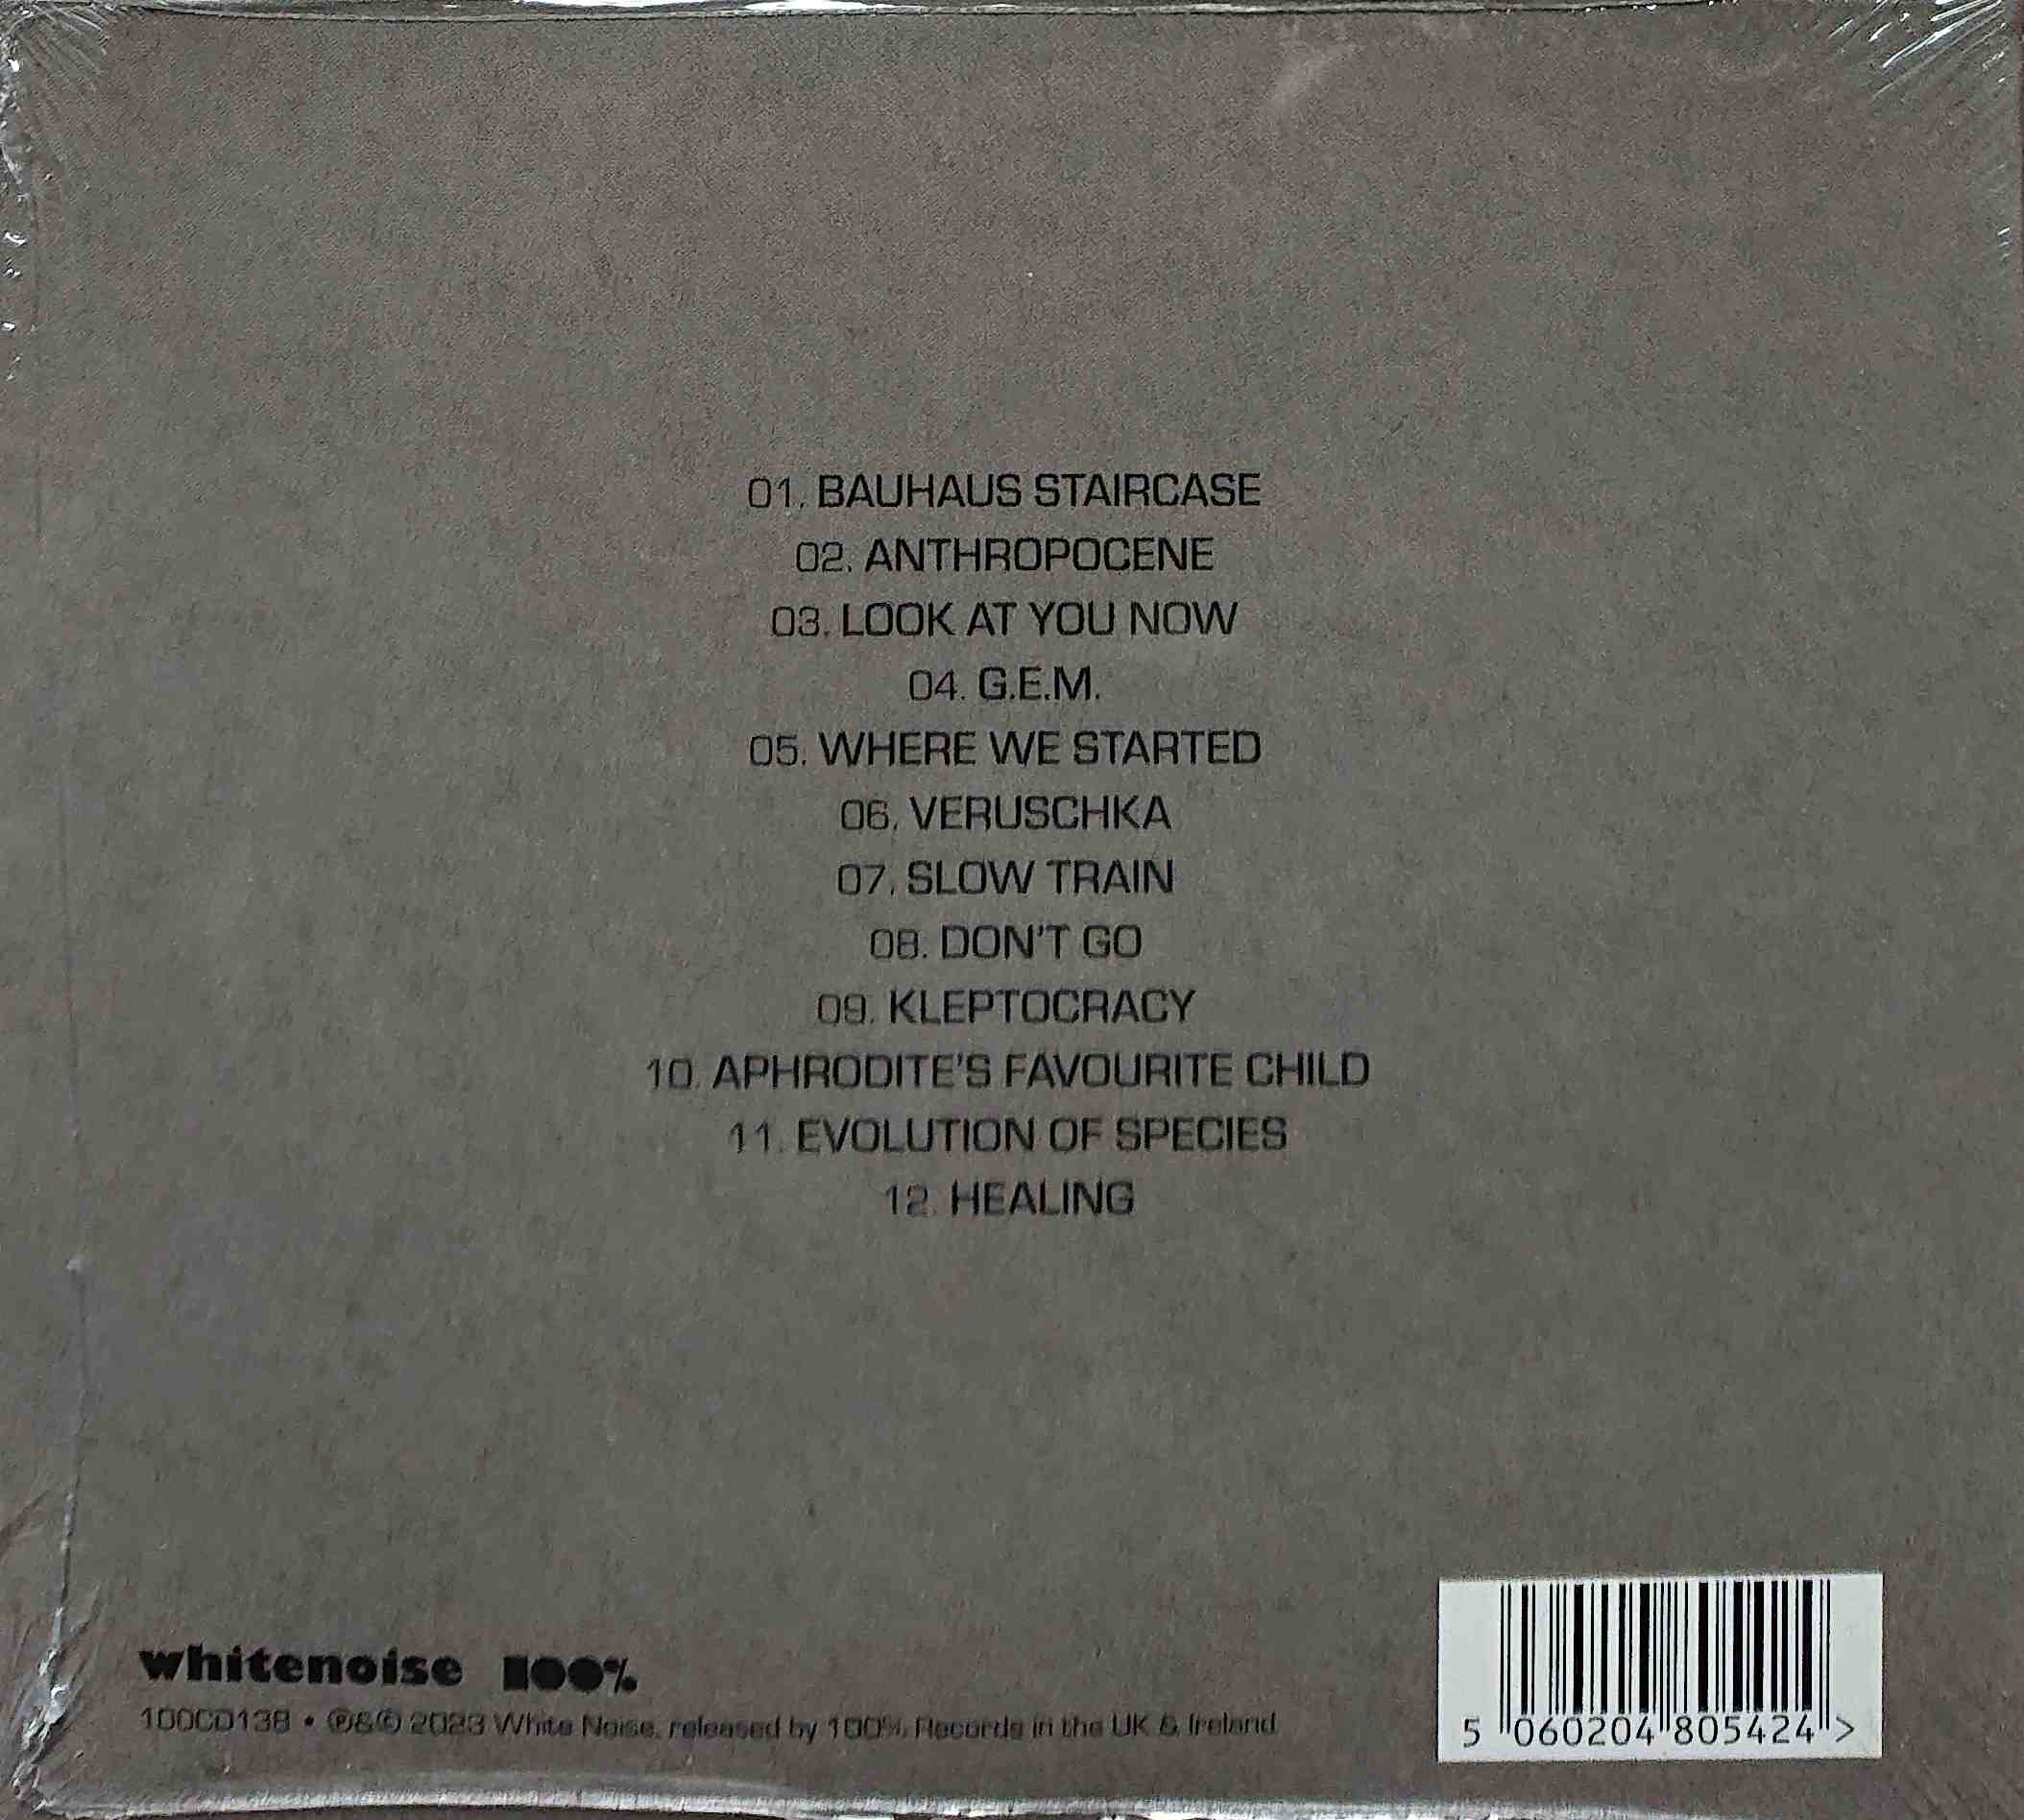 Back cover of 100CD138